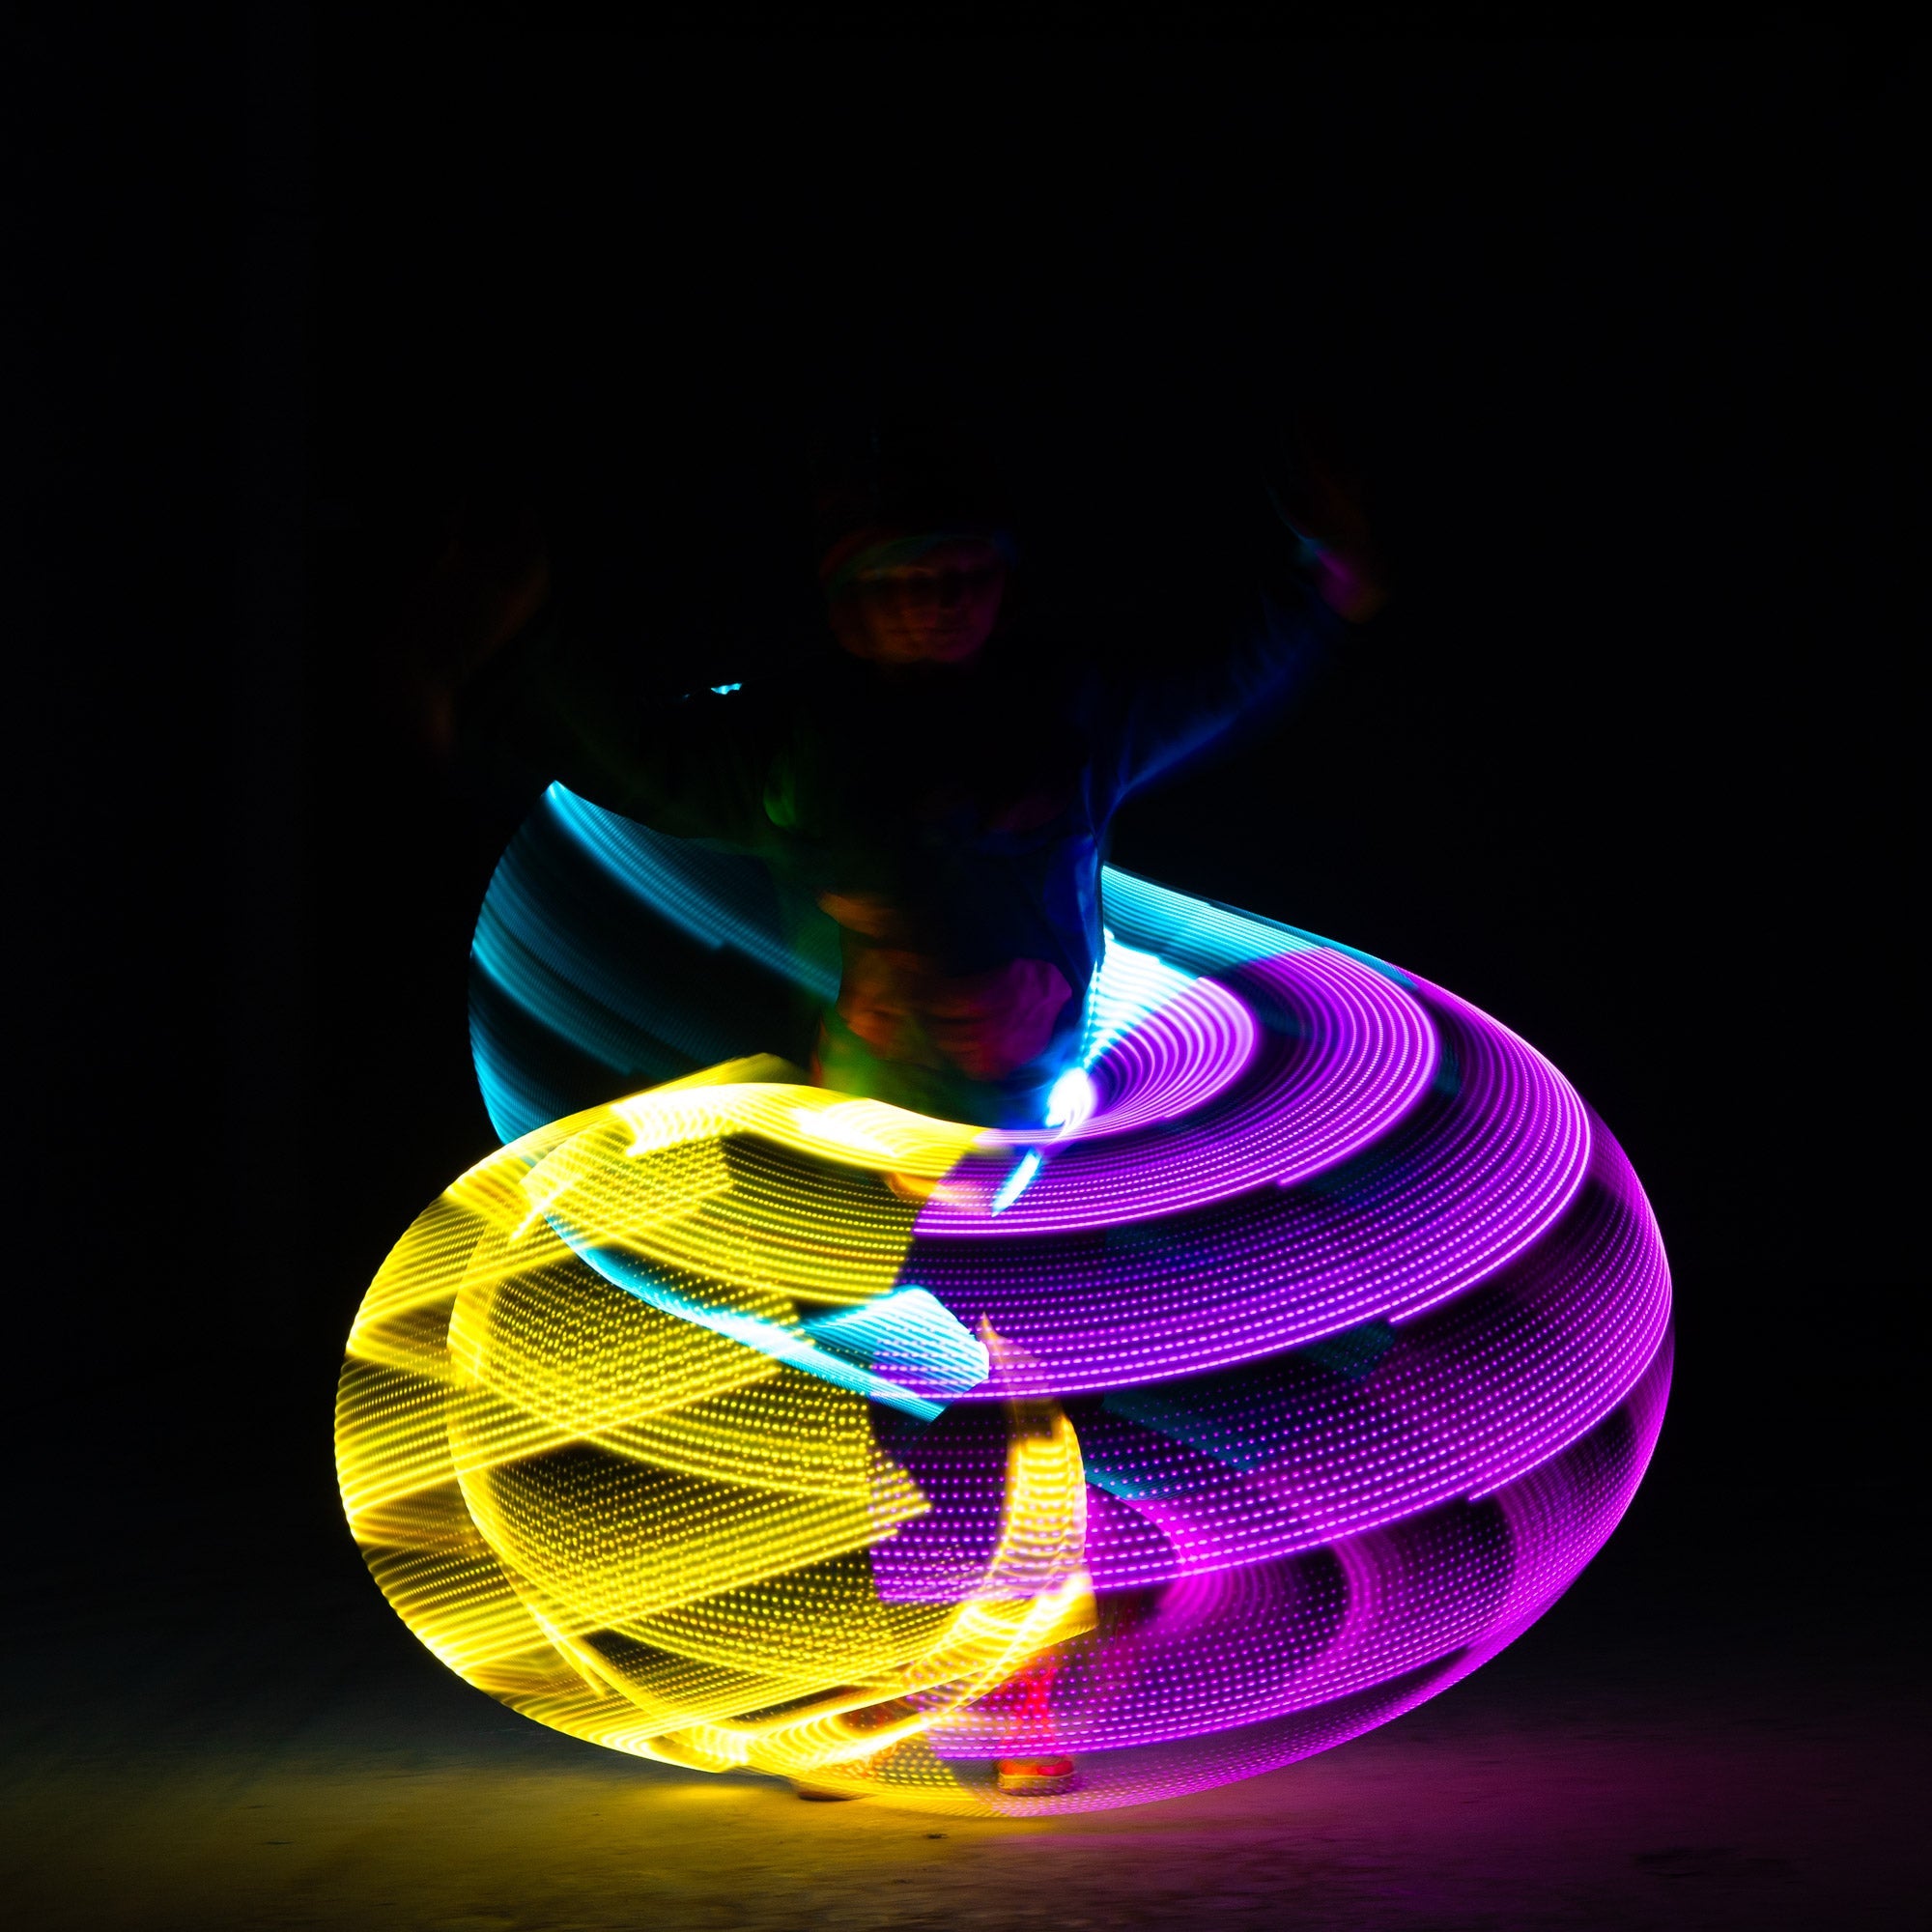 hula hooping with light trails